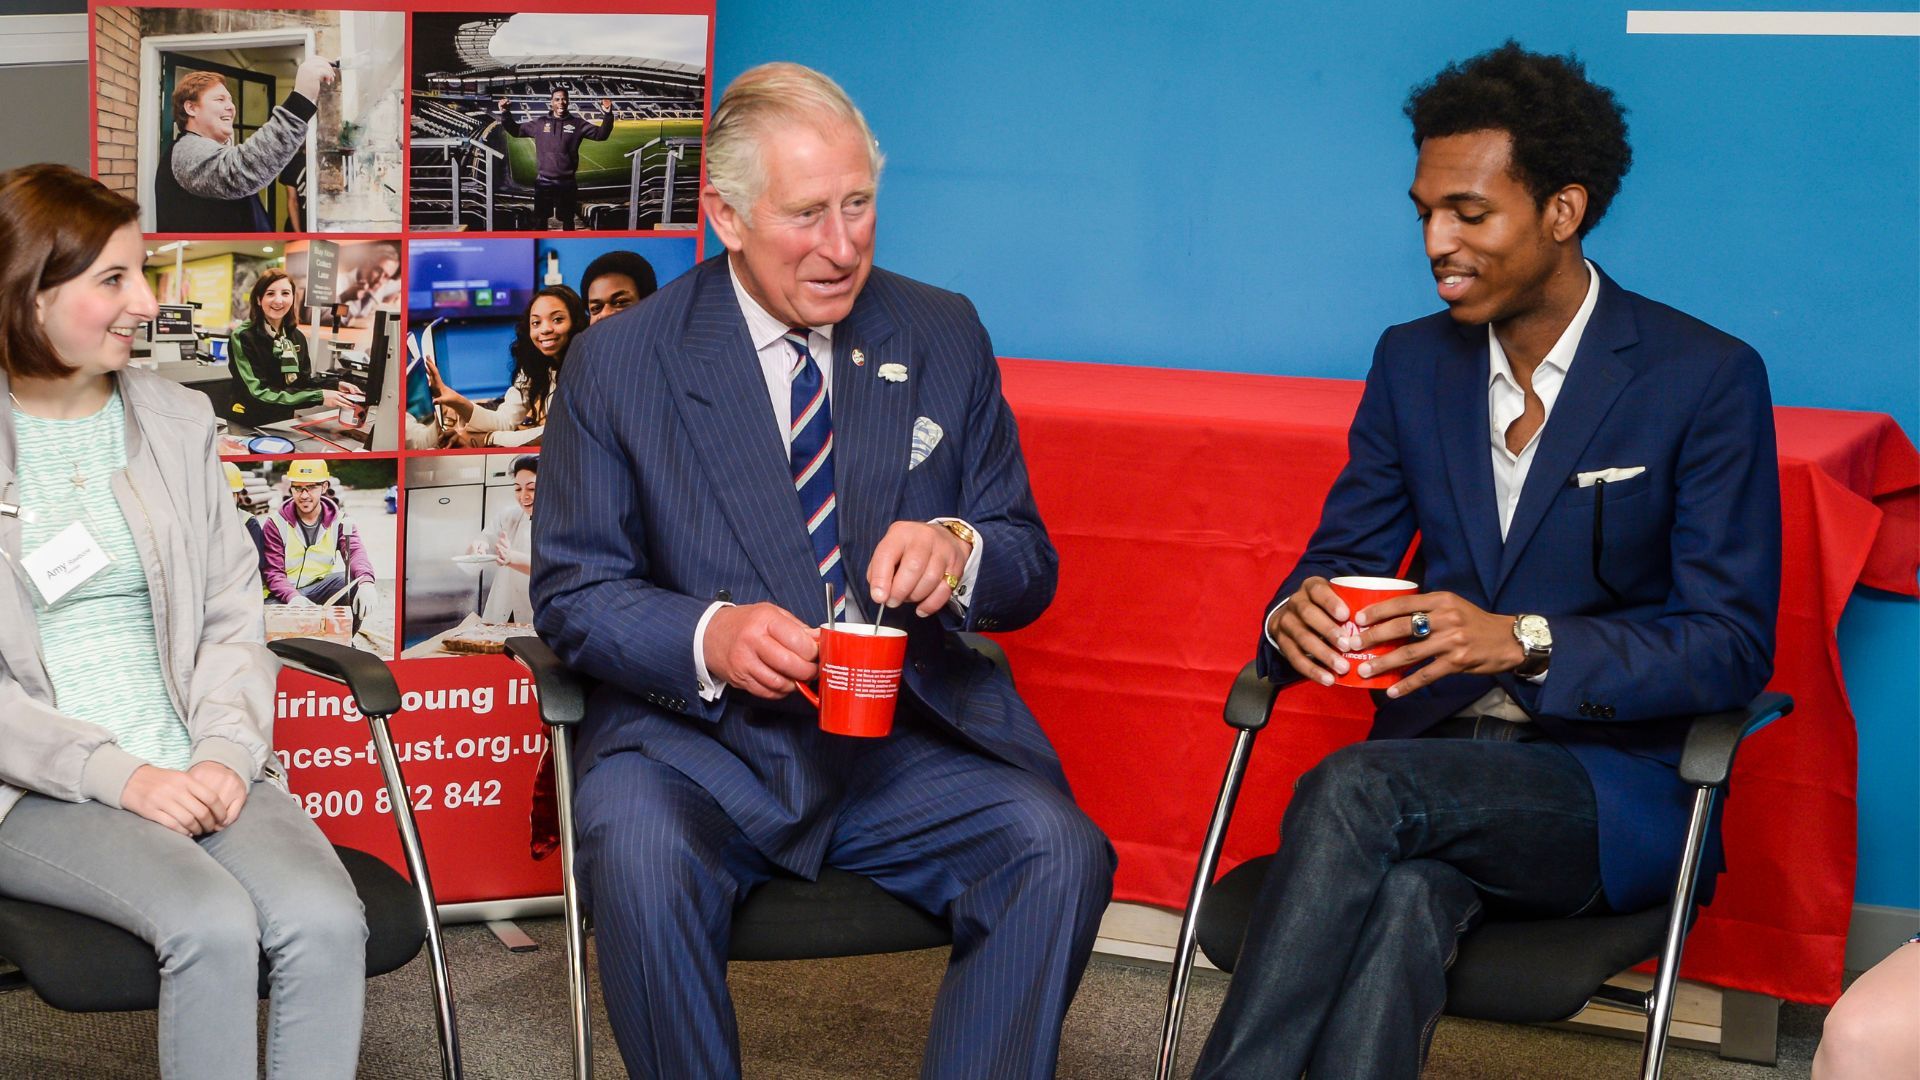 <p>                     It’s no secret that King Charles loves a good laugh and during his visit to 2016 visit to the Prince’s Trust Center in 2016 he got just that. When talking with staff and enjoying a cup of tea, the then-Prince realised he’d been given two teaspoons in his mug and found it rather amusing!                   </p>